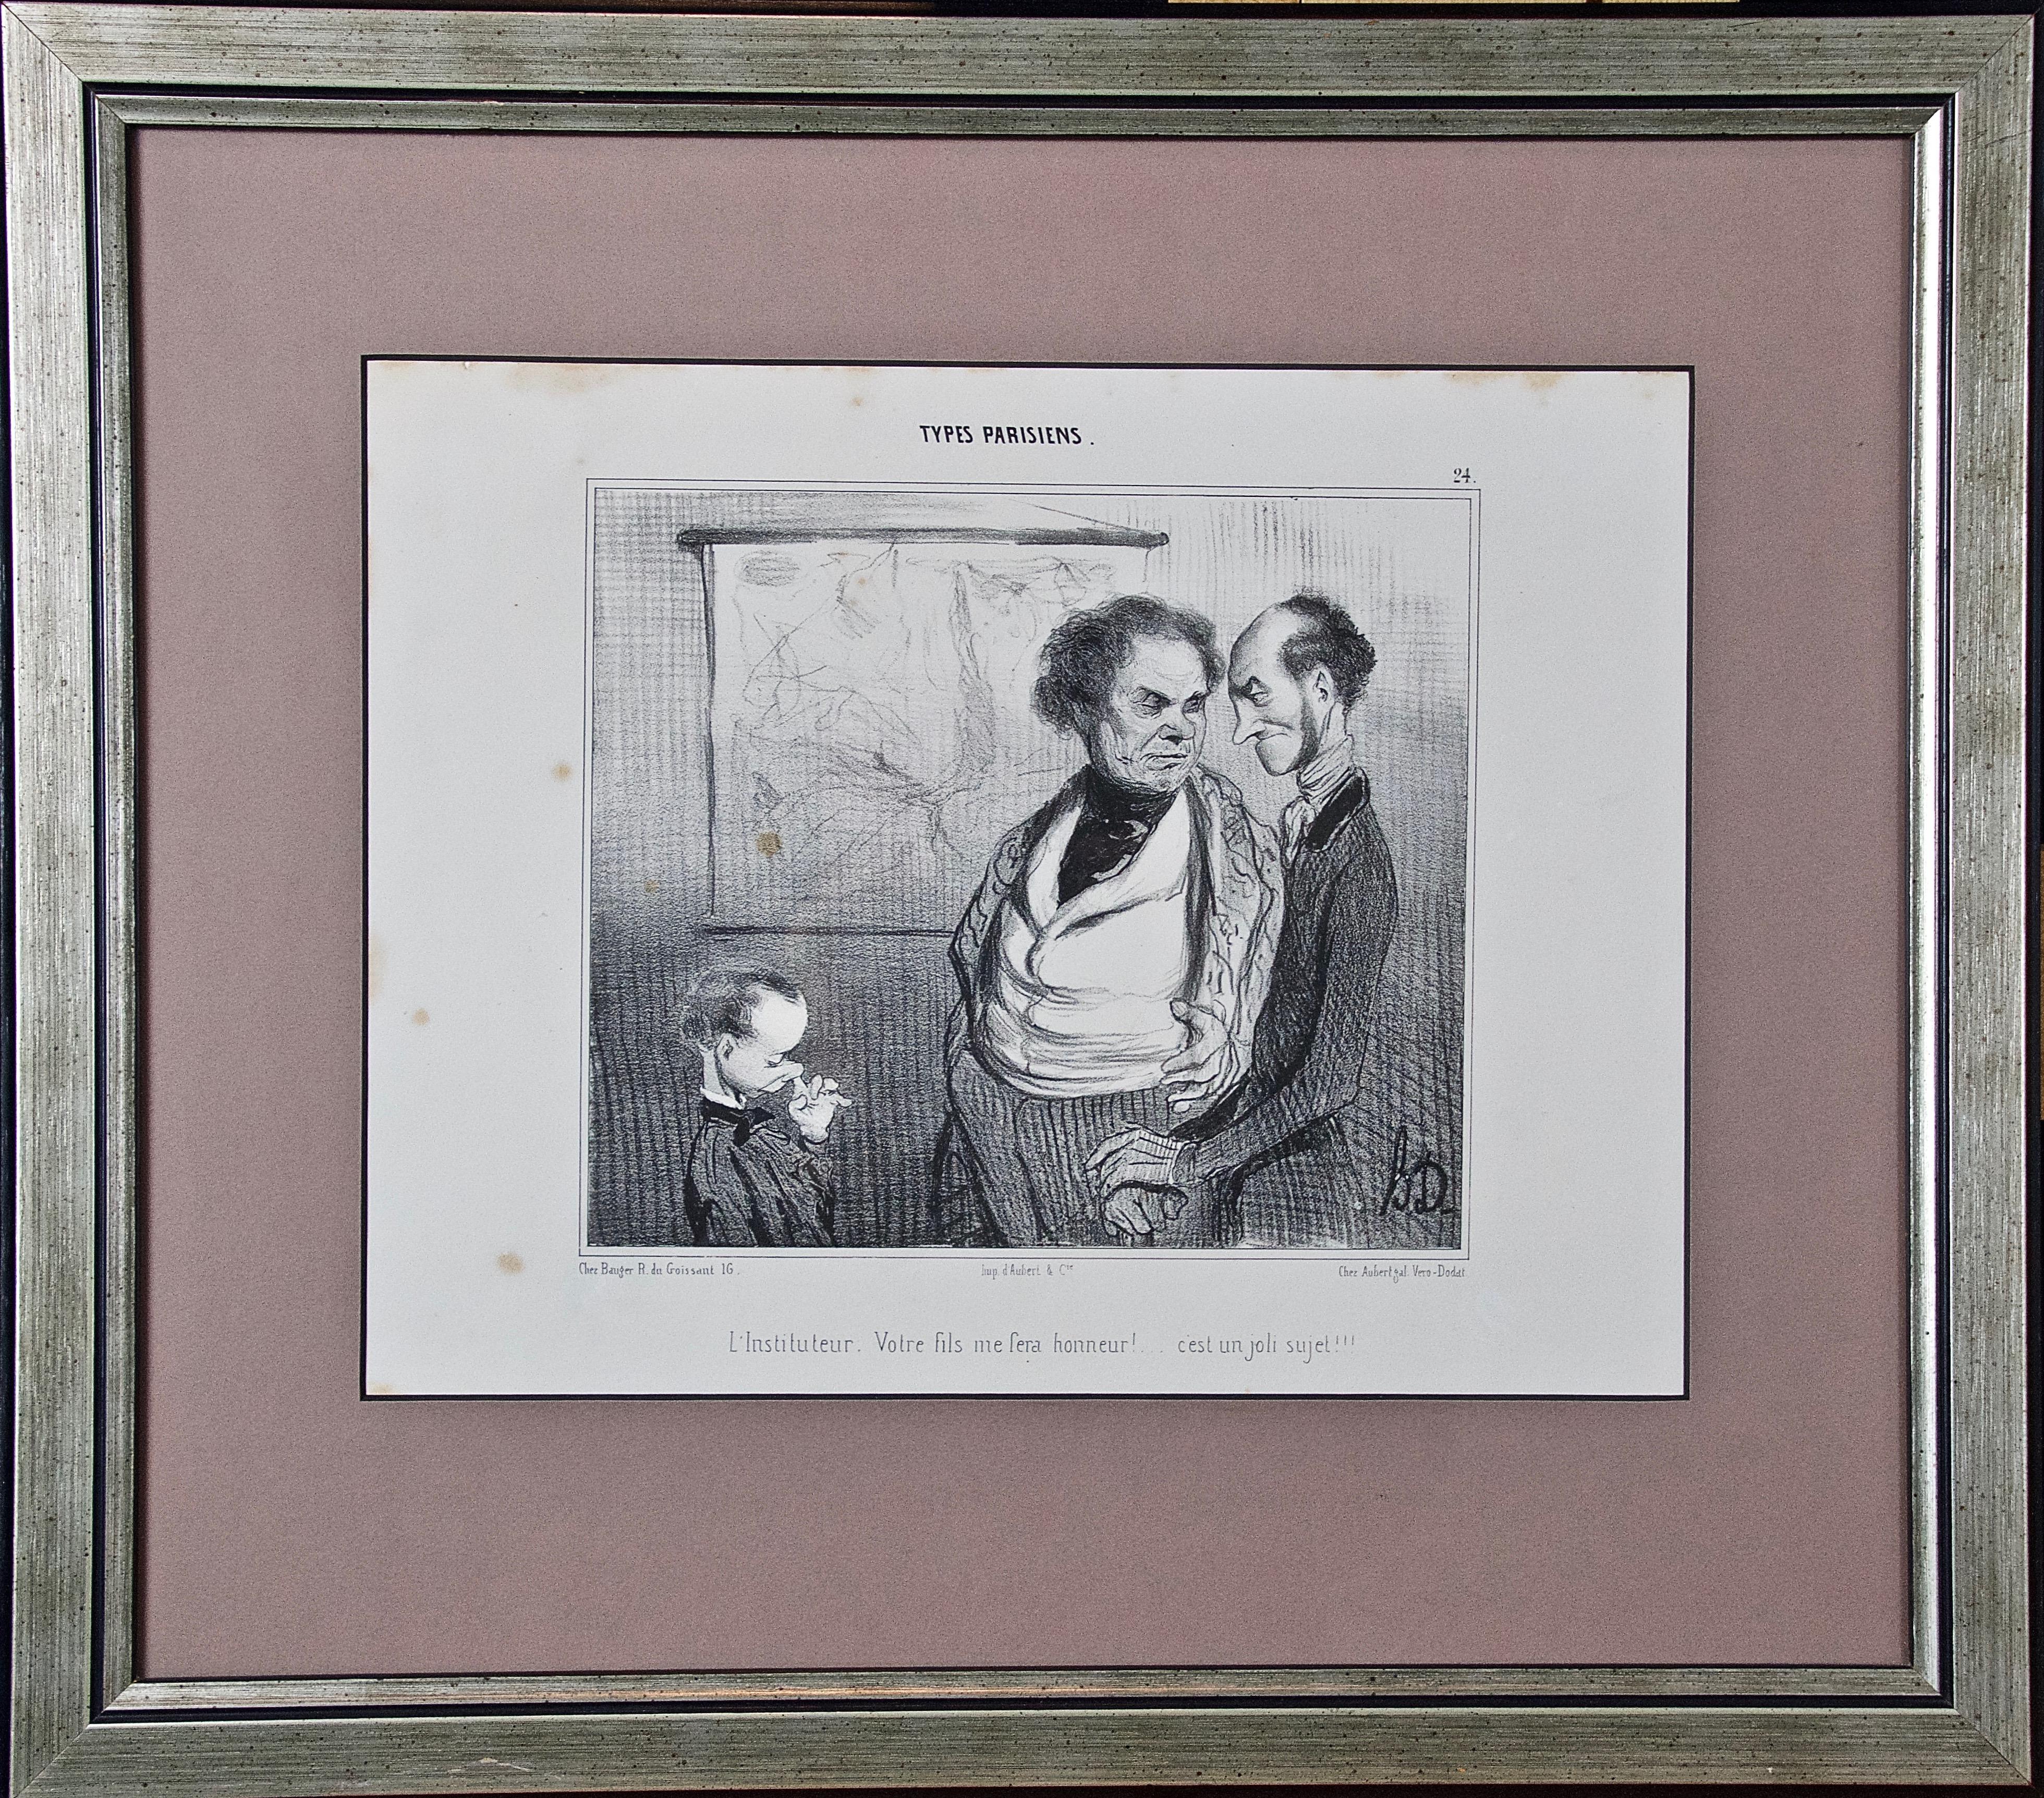 Honoré Daumier Print - A Rare 19th Century Honore Daumier Caricature from the "Types Parisiens" Series